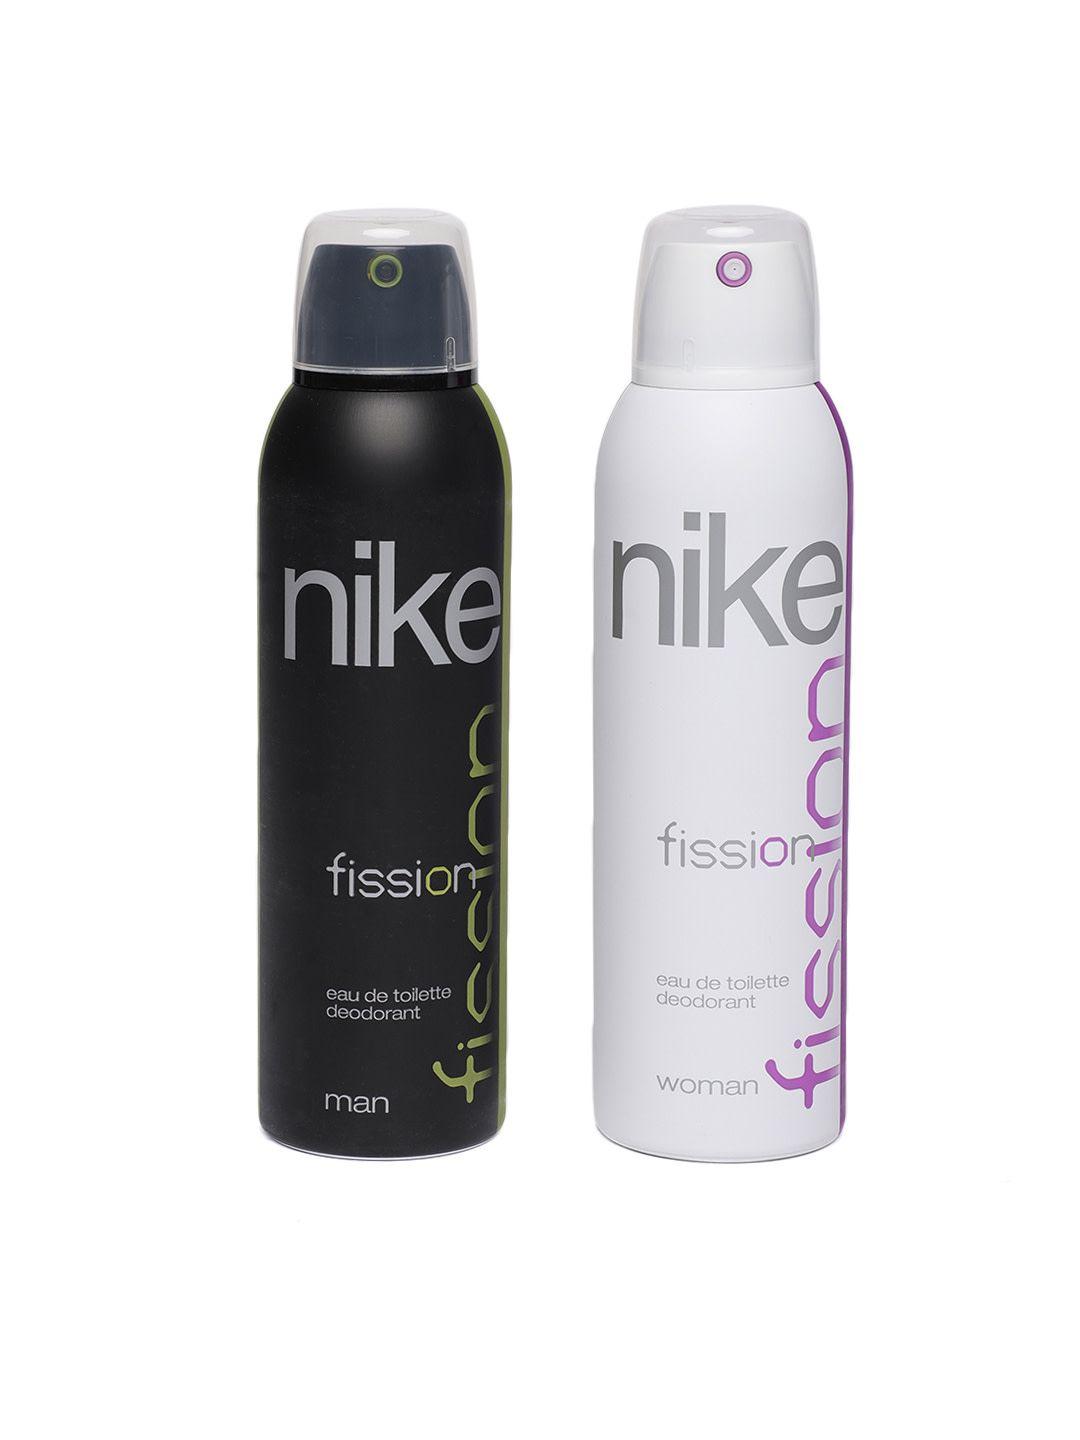 nike-unisex-fission-duo-set-of-2-deos-of-200-ml-each